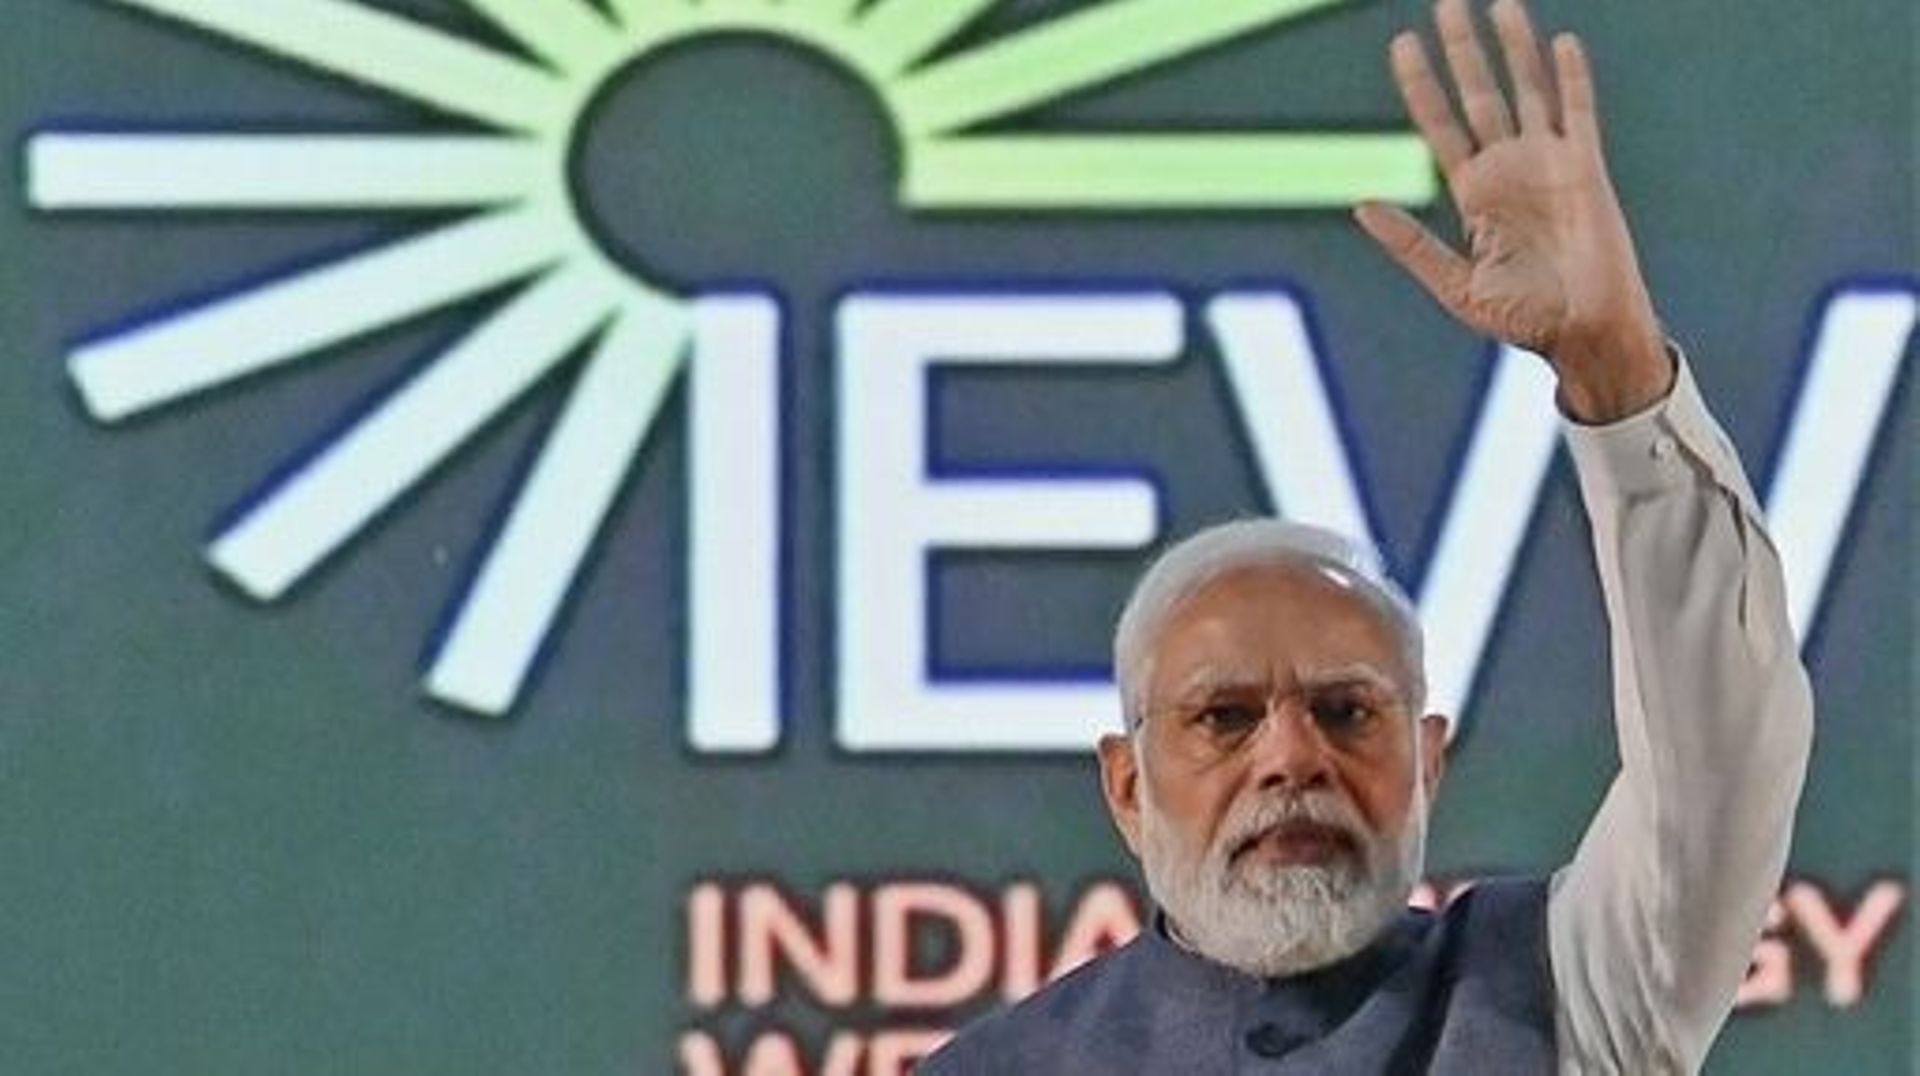 India’s Prime Minister Narendra Modi waves at the crowd during the inauguration of 'India Energy Week 2023' under India’s G20 Presidency, in Bengaluru on February 6, 2023. Manjunath KIRAN / AFP